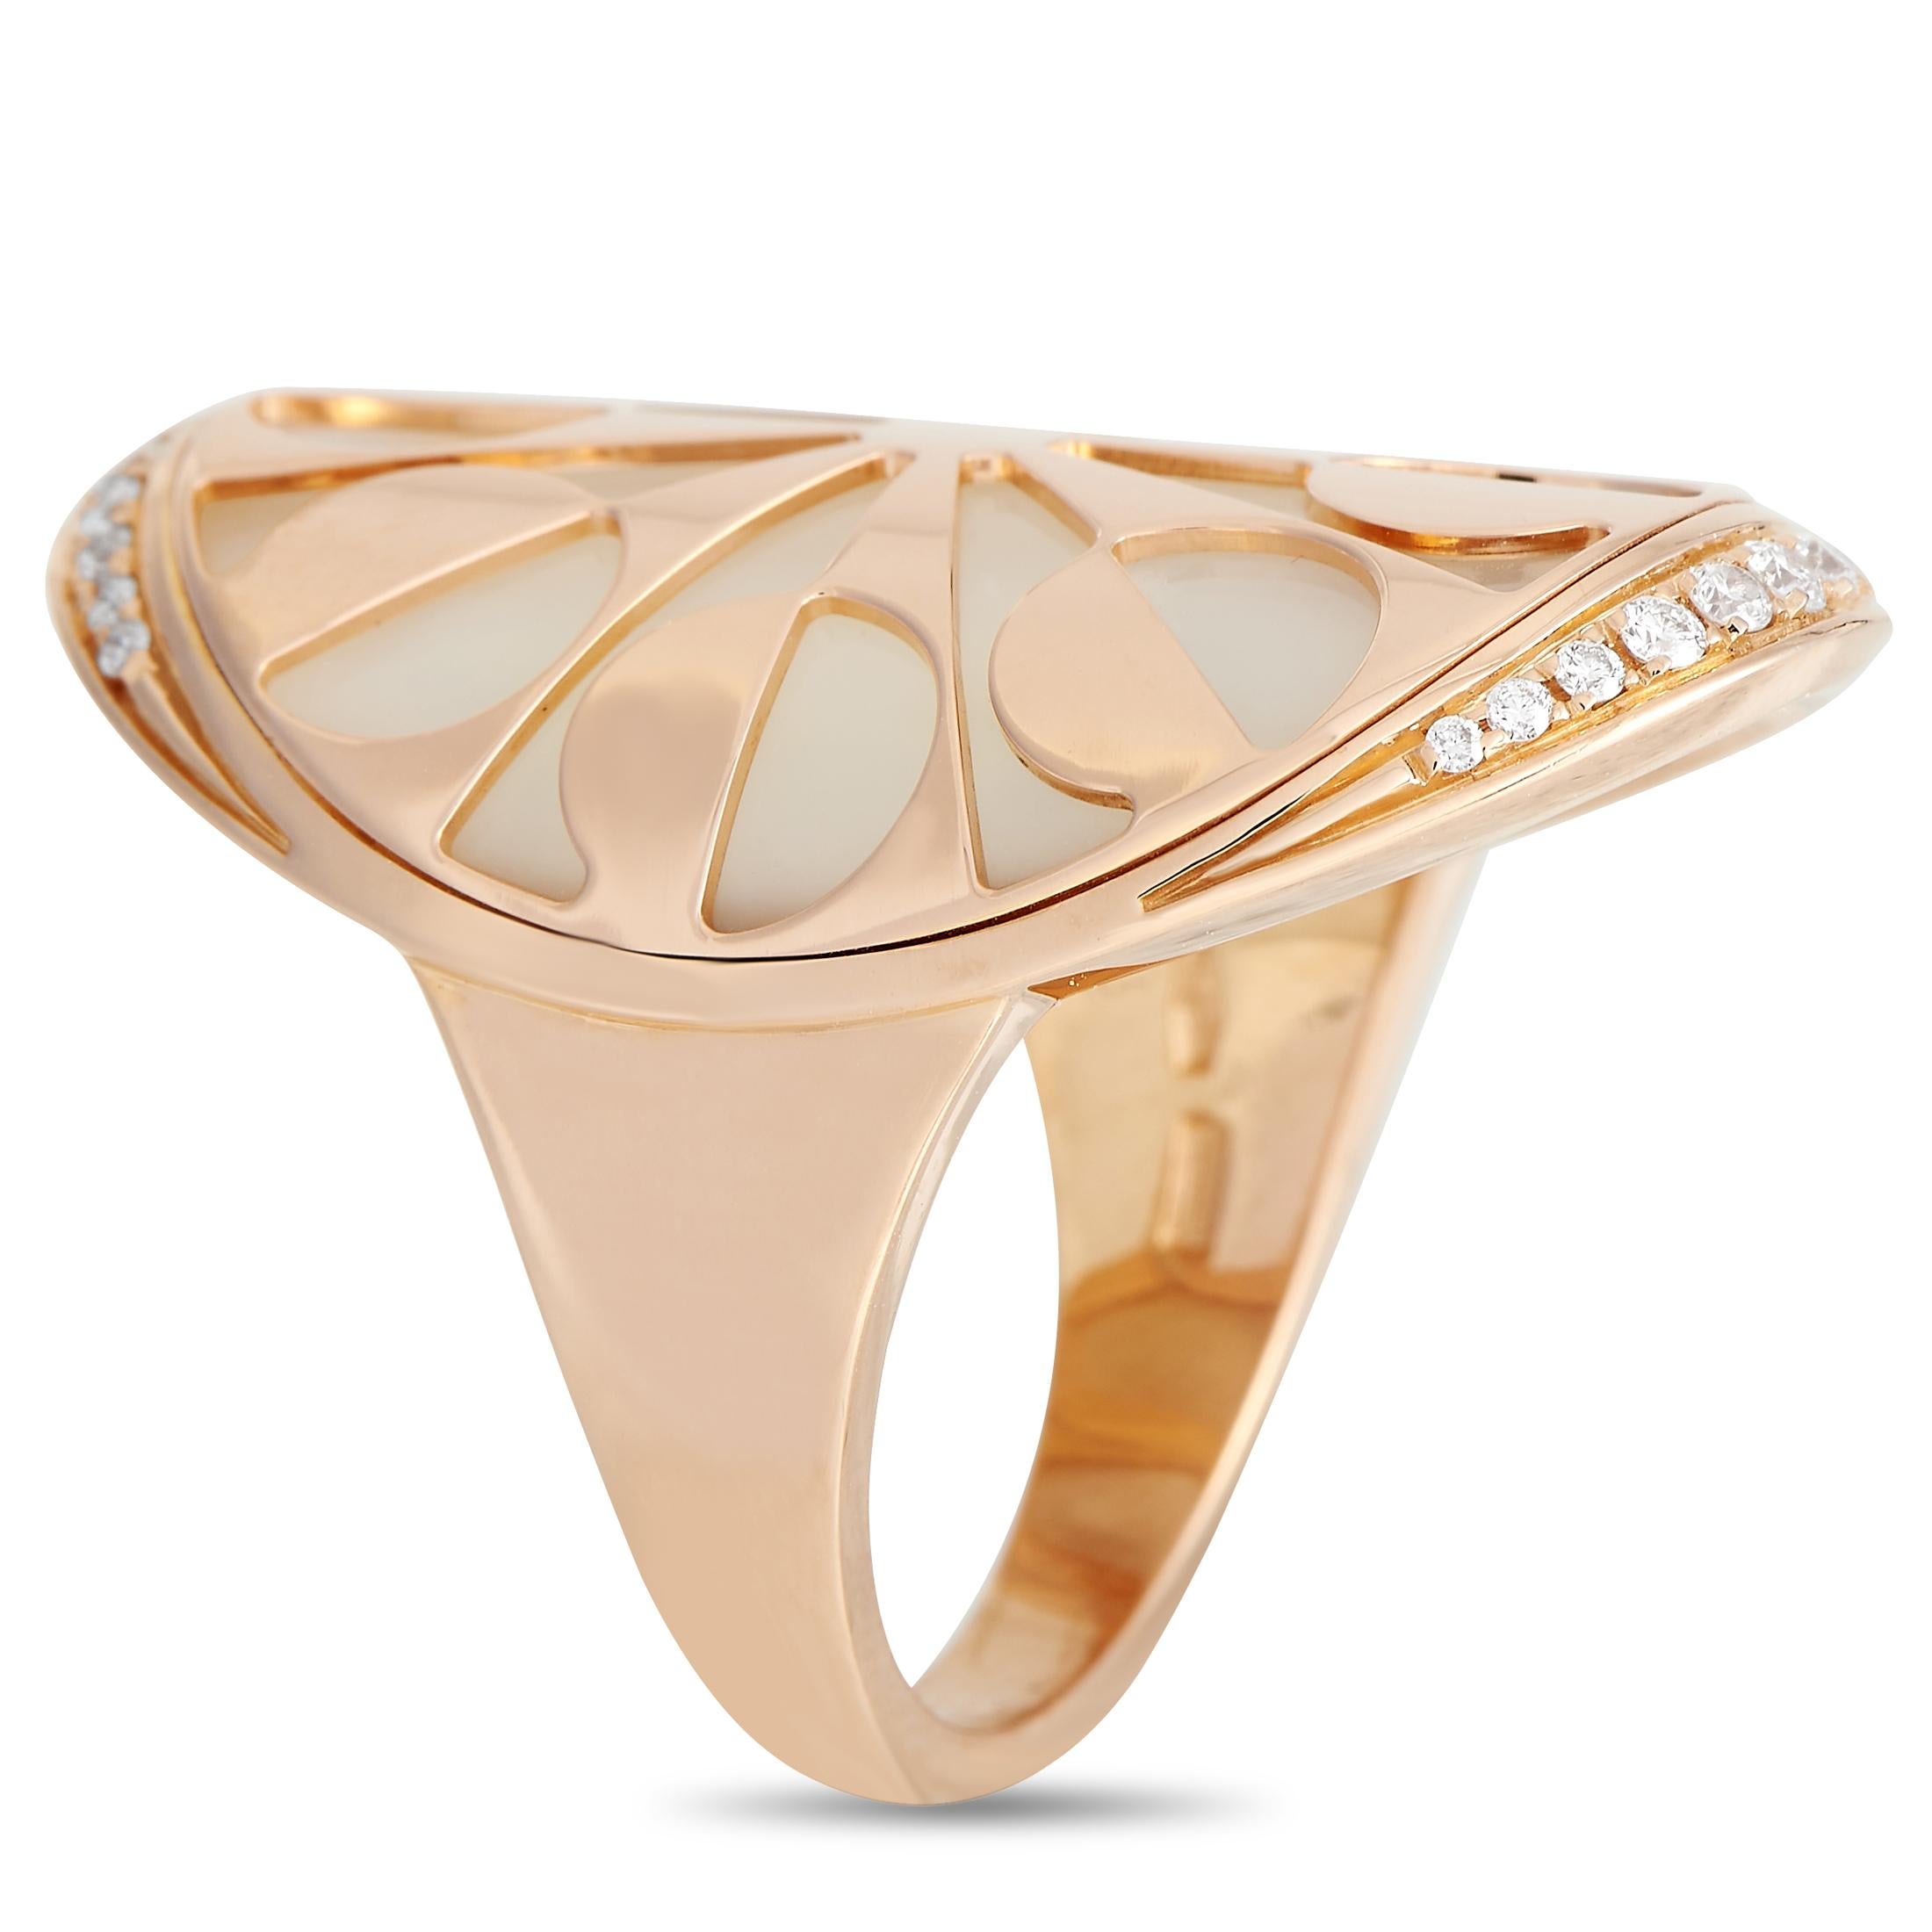 This 18K Rose Gold Bvlgari Intarsio ring is a timeless accessory with a commanding presence. Elevated by opulent Mother of Pearl accents and sparkling Diamonds totaling 0.20 carats, its a breathtaking piece of jewelry that will forever make a